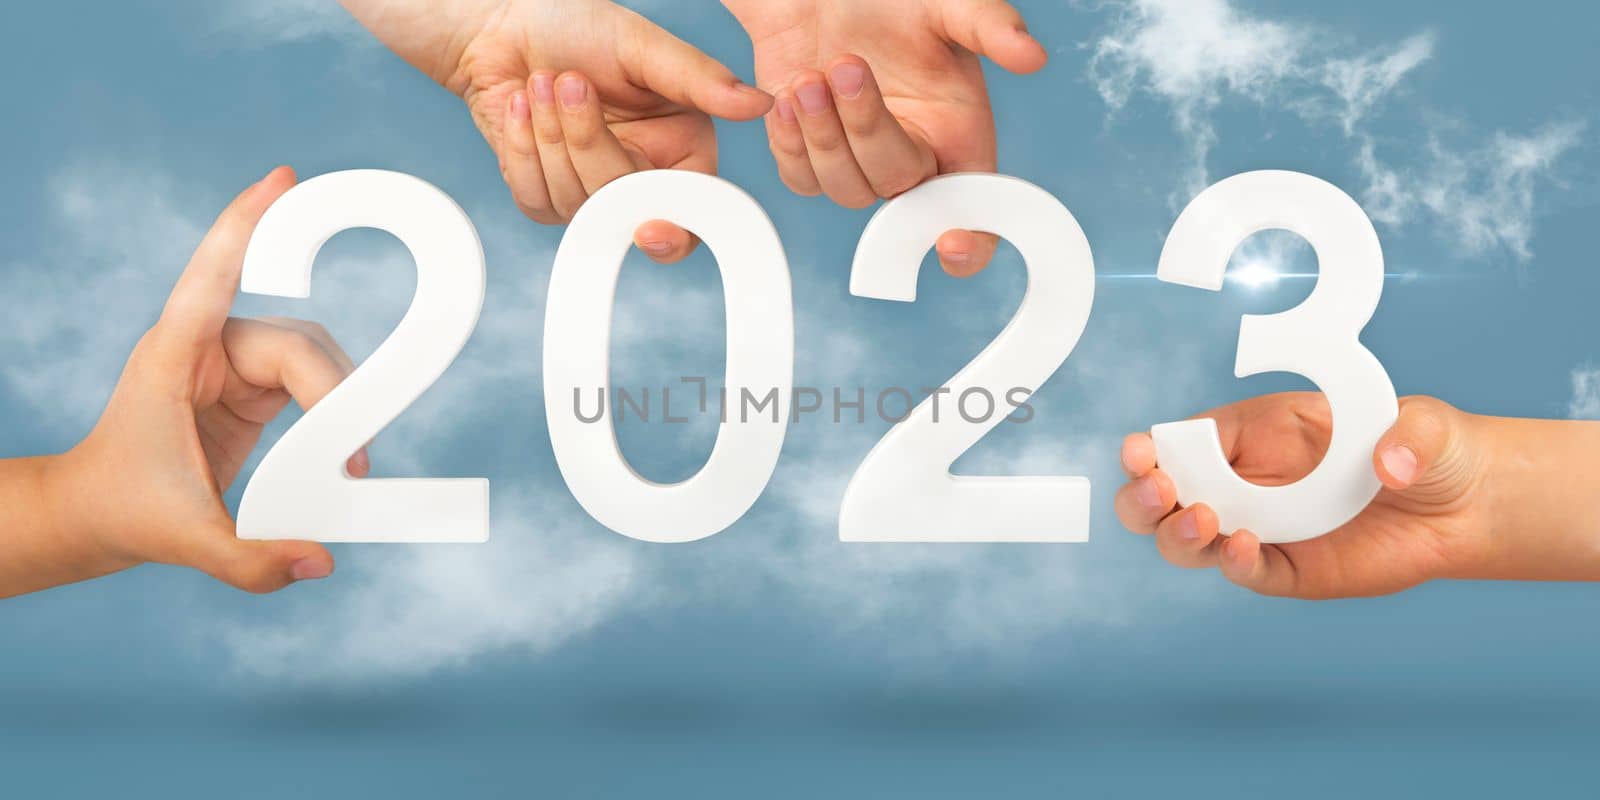 numbers in hands 2 0 2 3. Hands holding numbers folding into the year 2023 kas symbol of the new year. Calendar design or website banner.